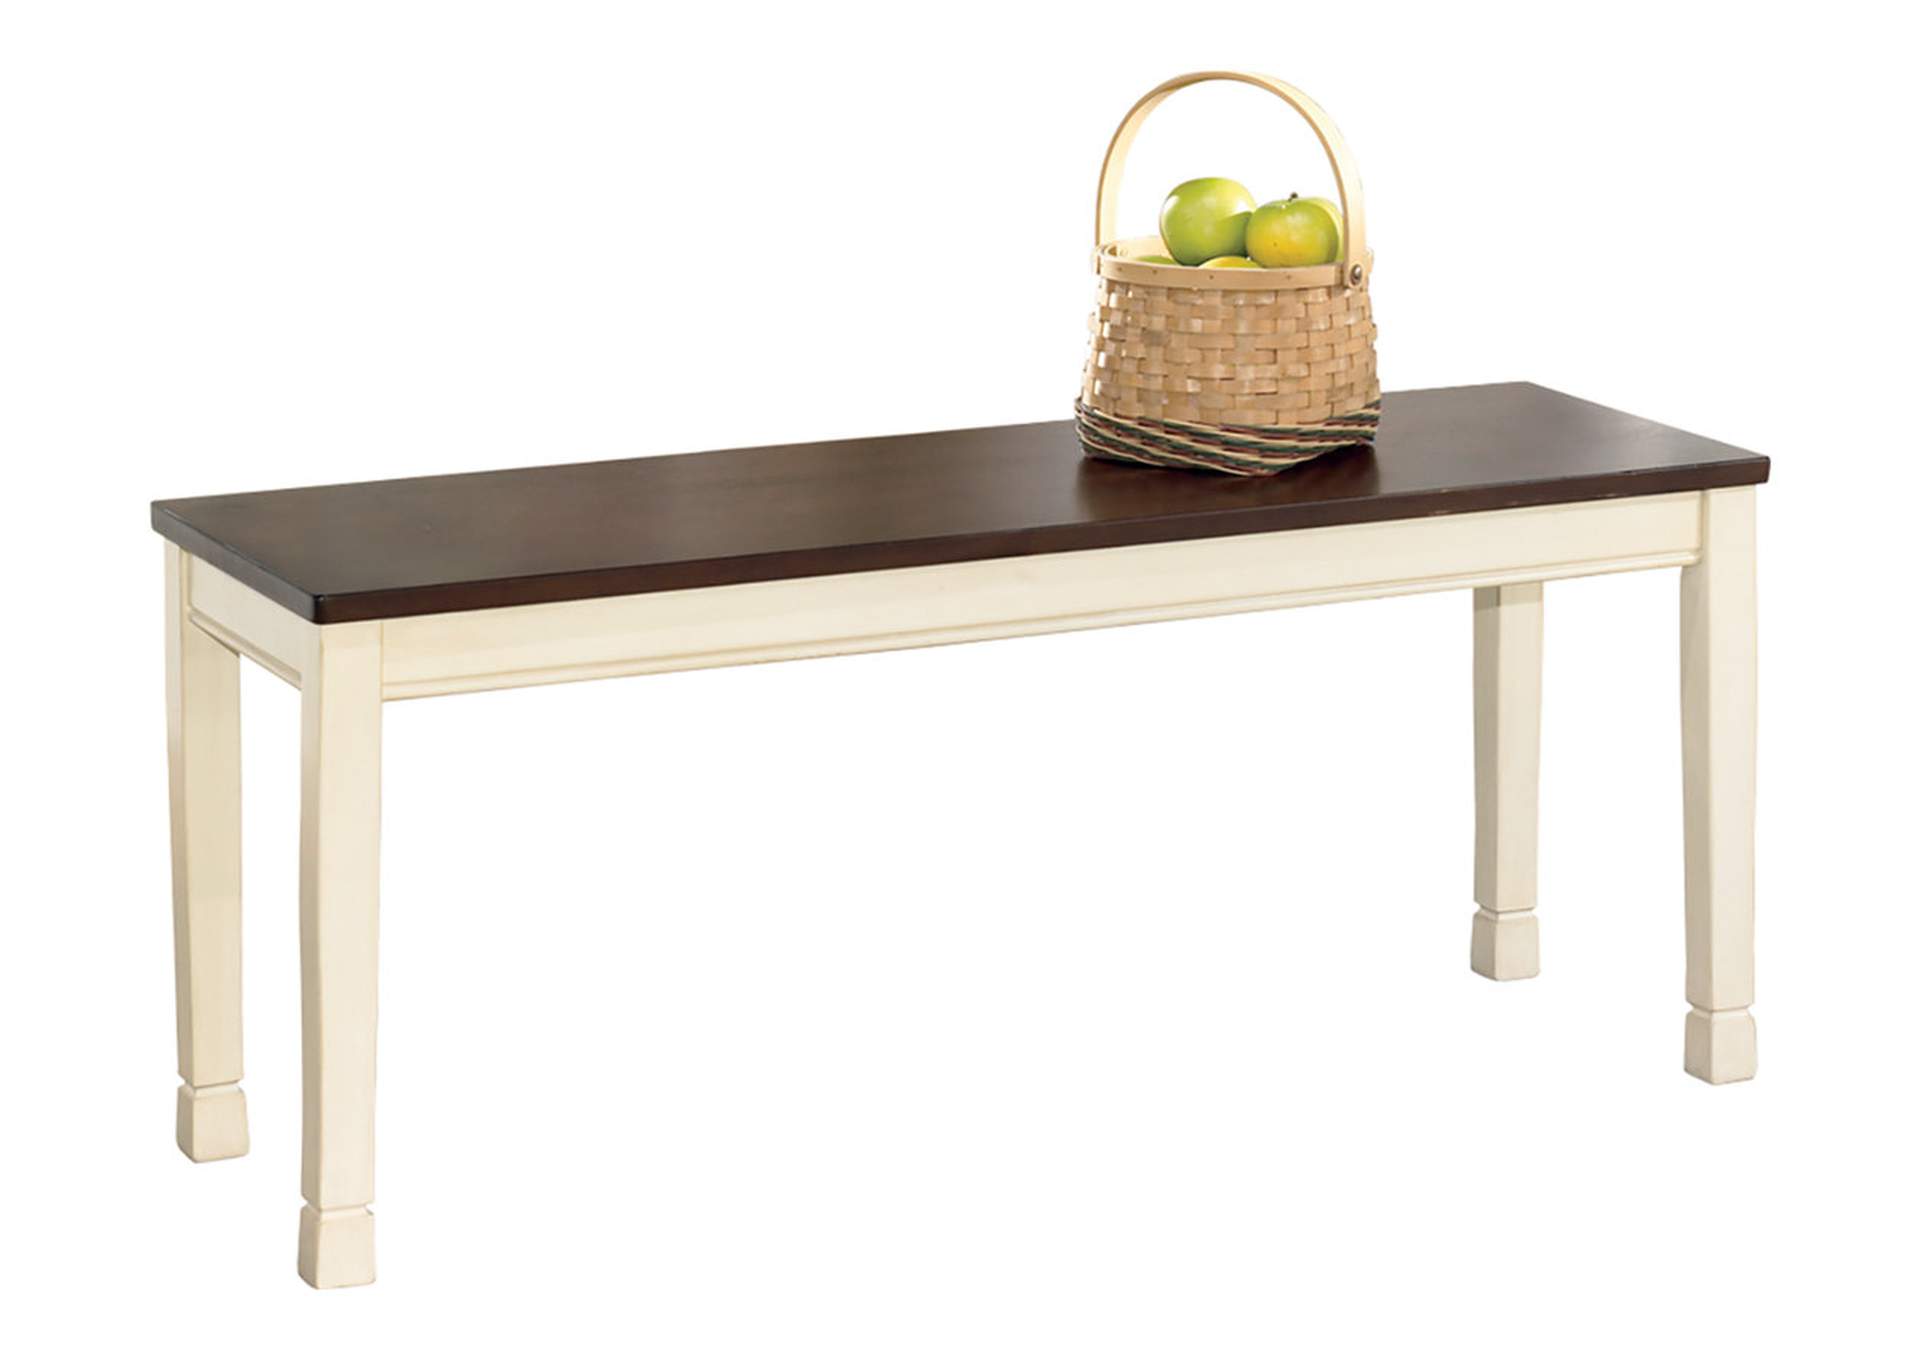 Whitesburg Dining Room Bench,Direct To Consumer Express